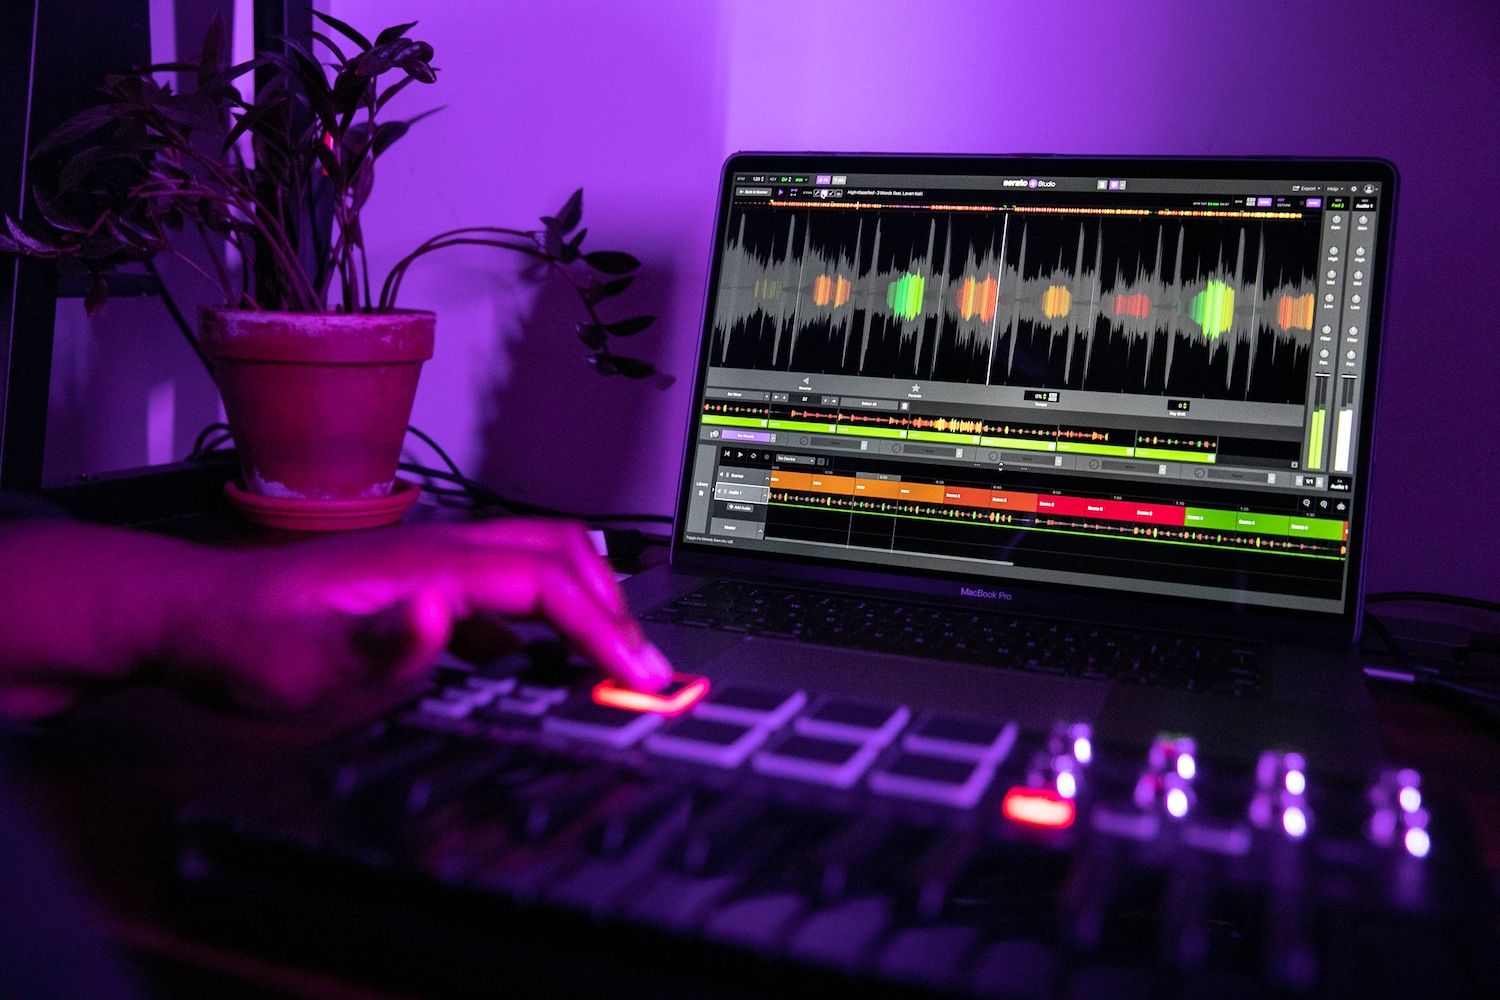 Serato Studio 2.0 on a laptop computer in purple room with a hand in the foreground triggering a cuepoint on a MIDI controller